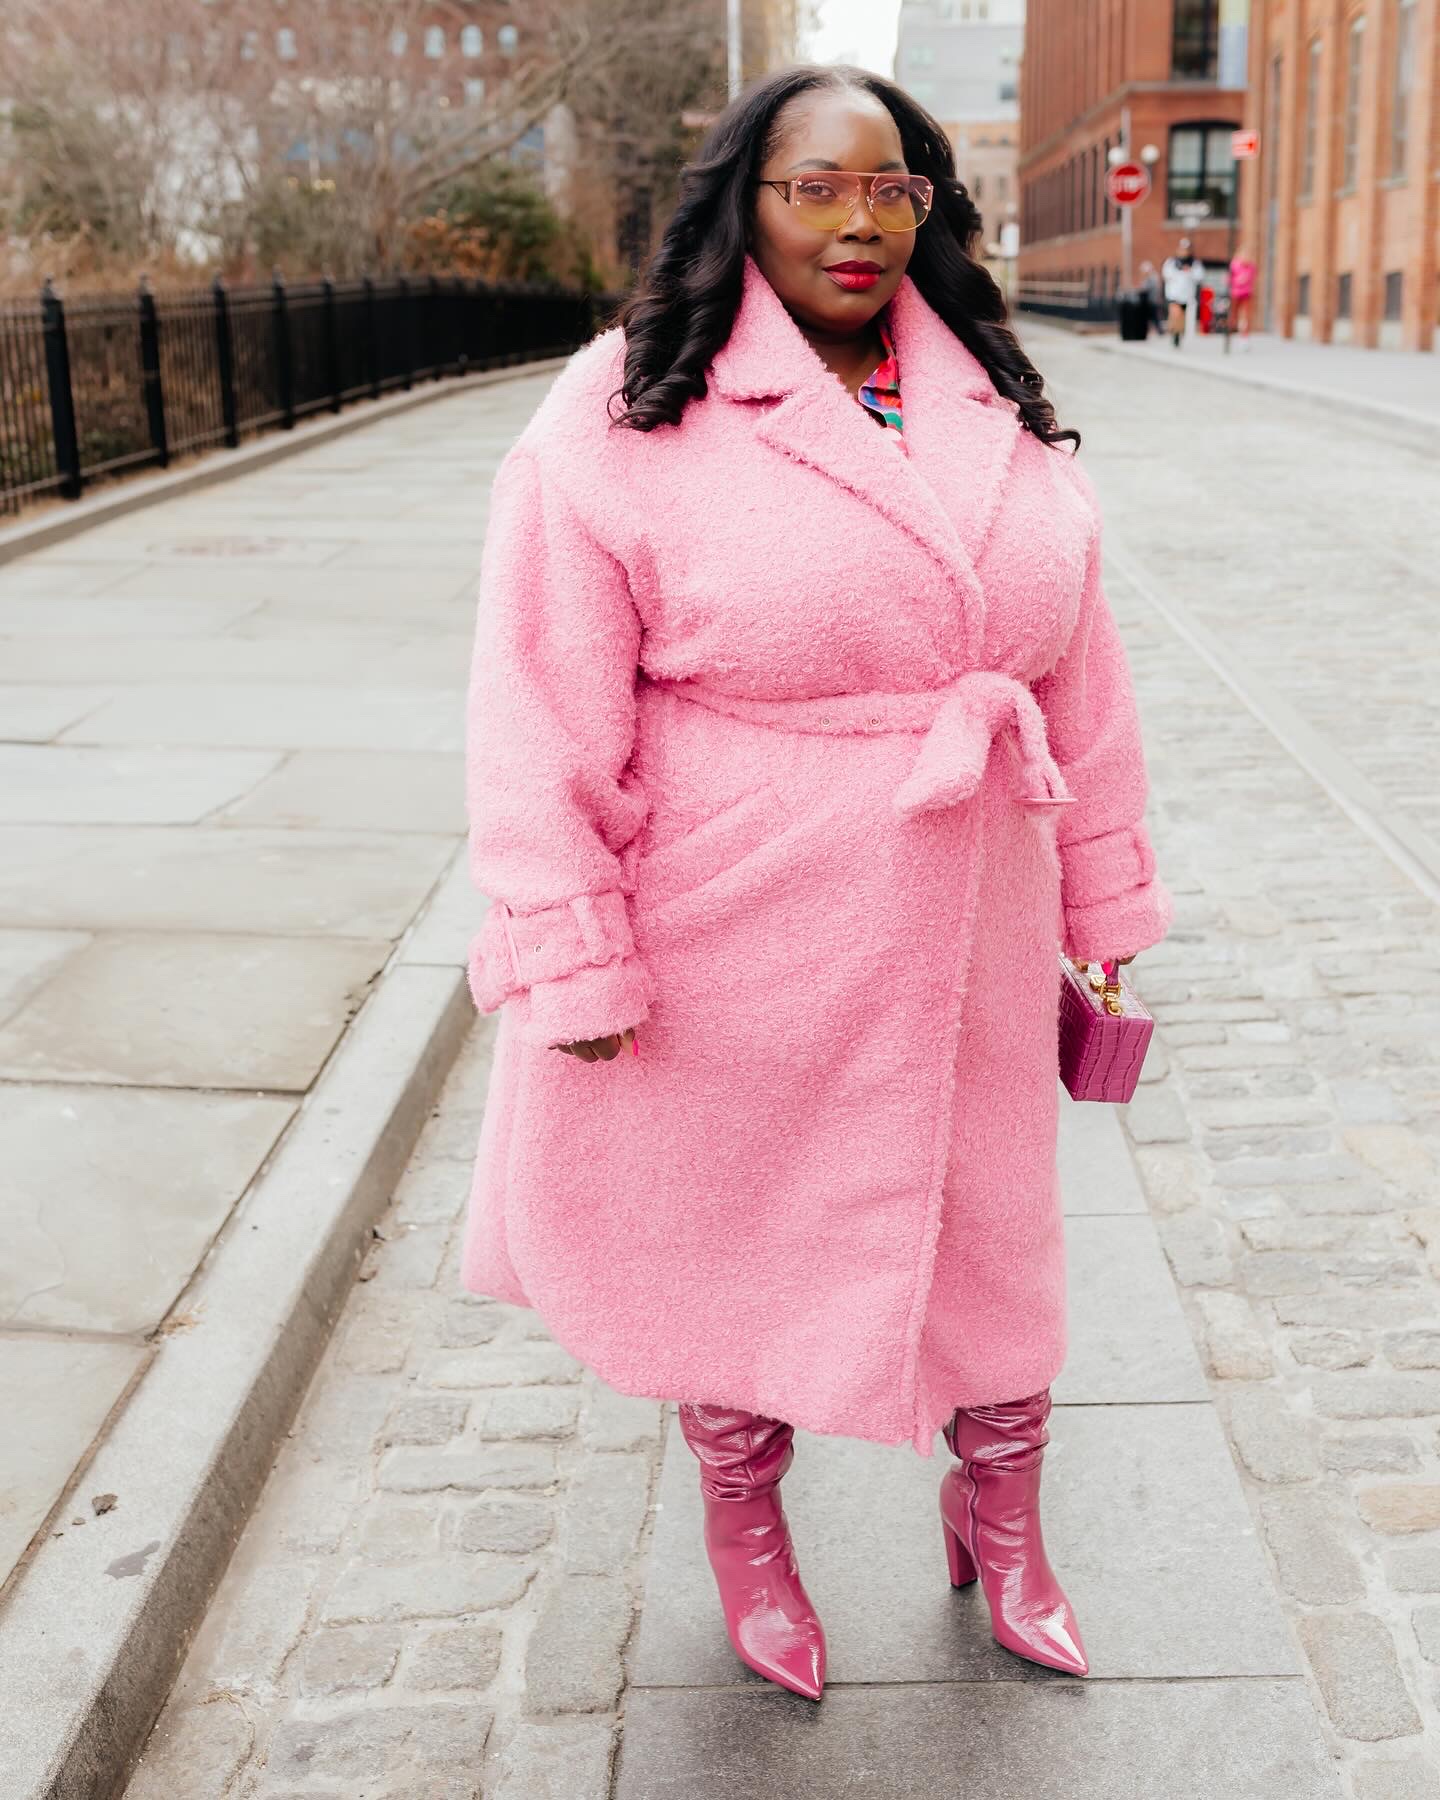 plus size winter outfit idea featuring a pink teddy coat and purple boots